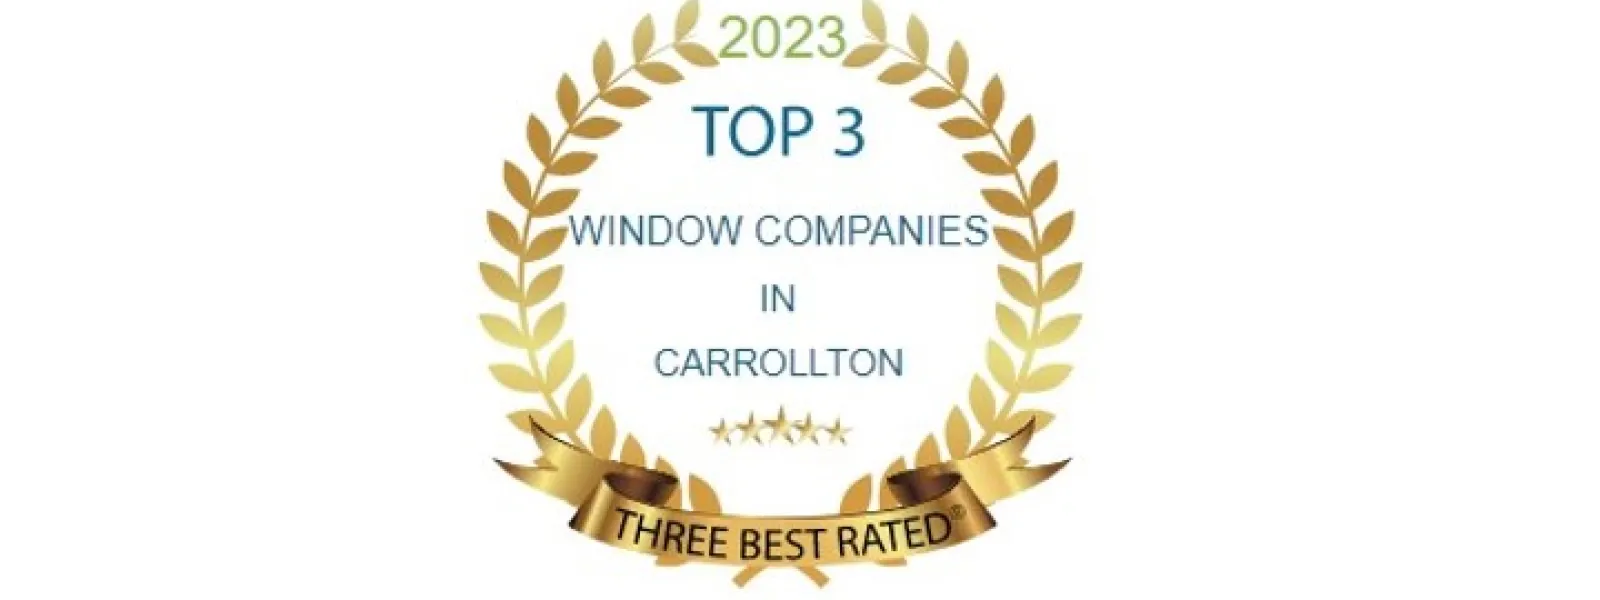 Expo Home Improvement Ranks as The Top Three Best Window Companies in Carrollton